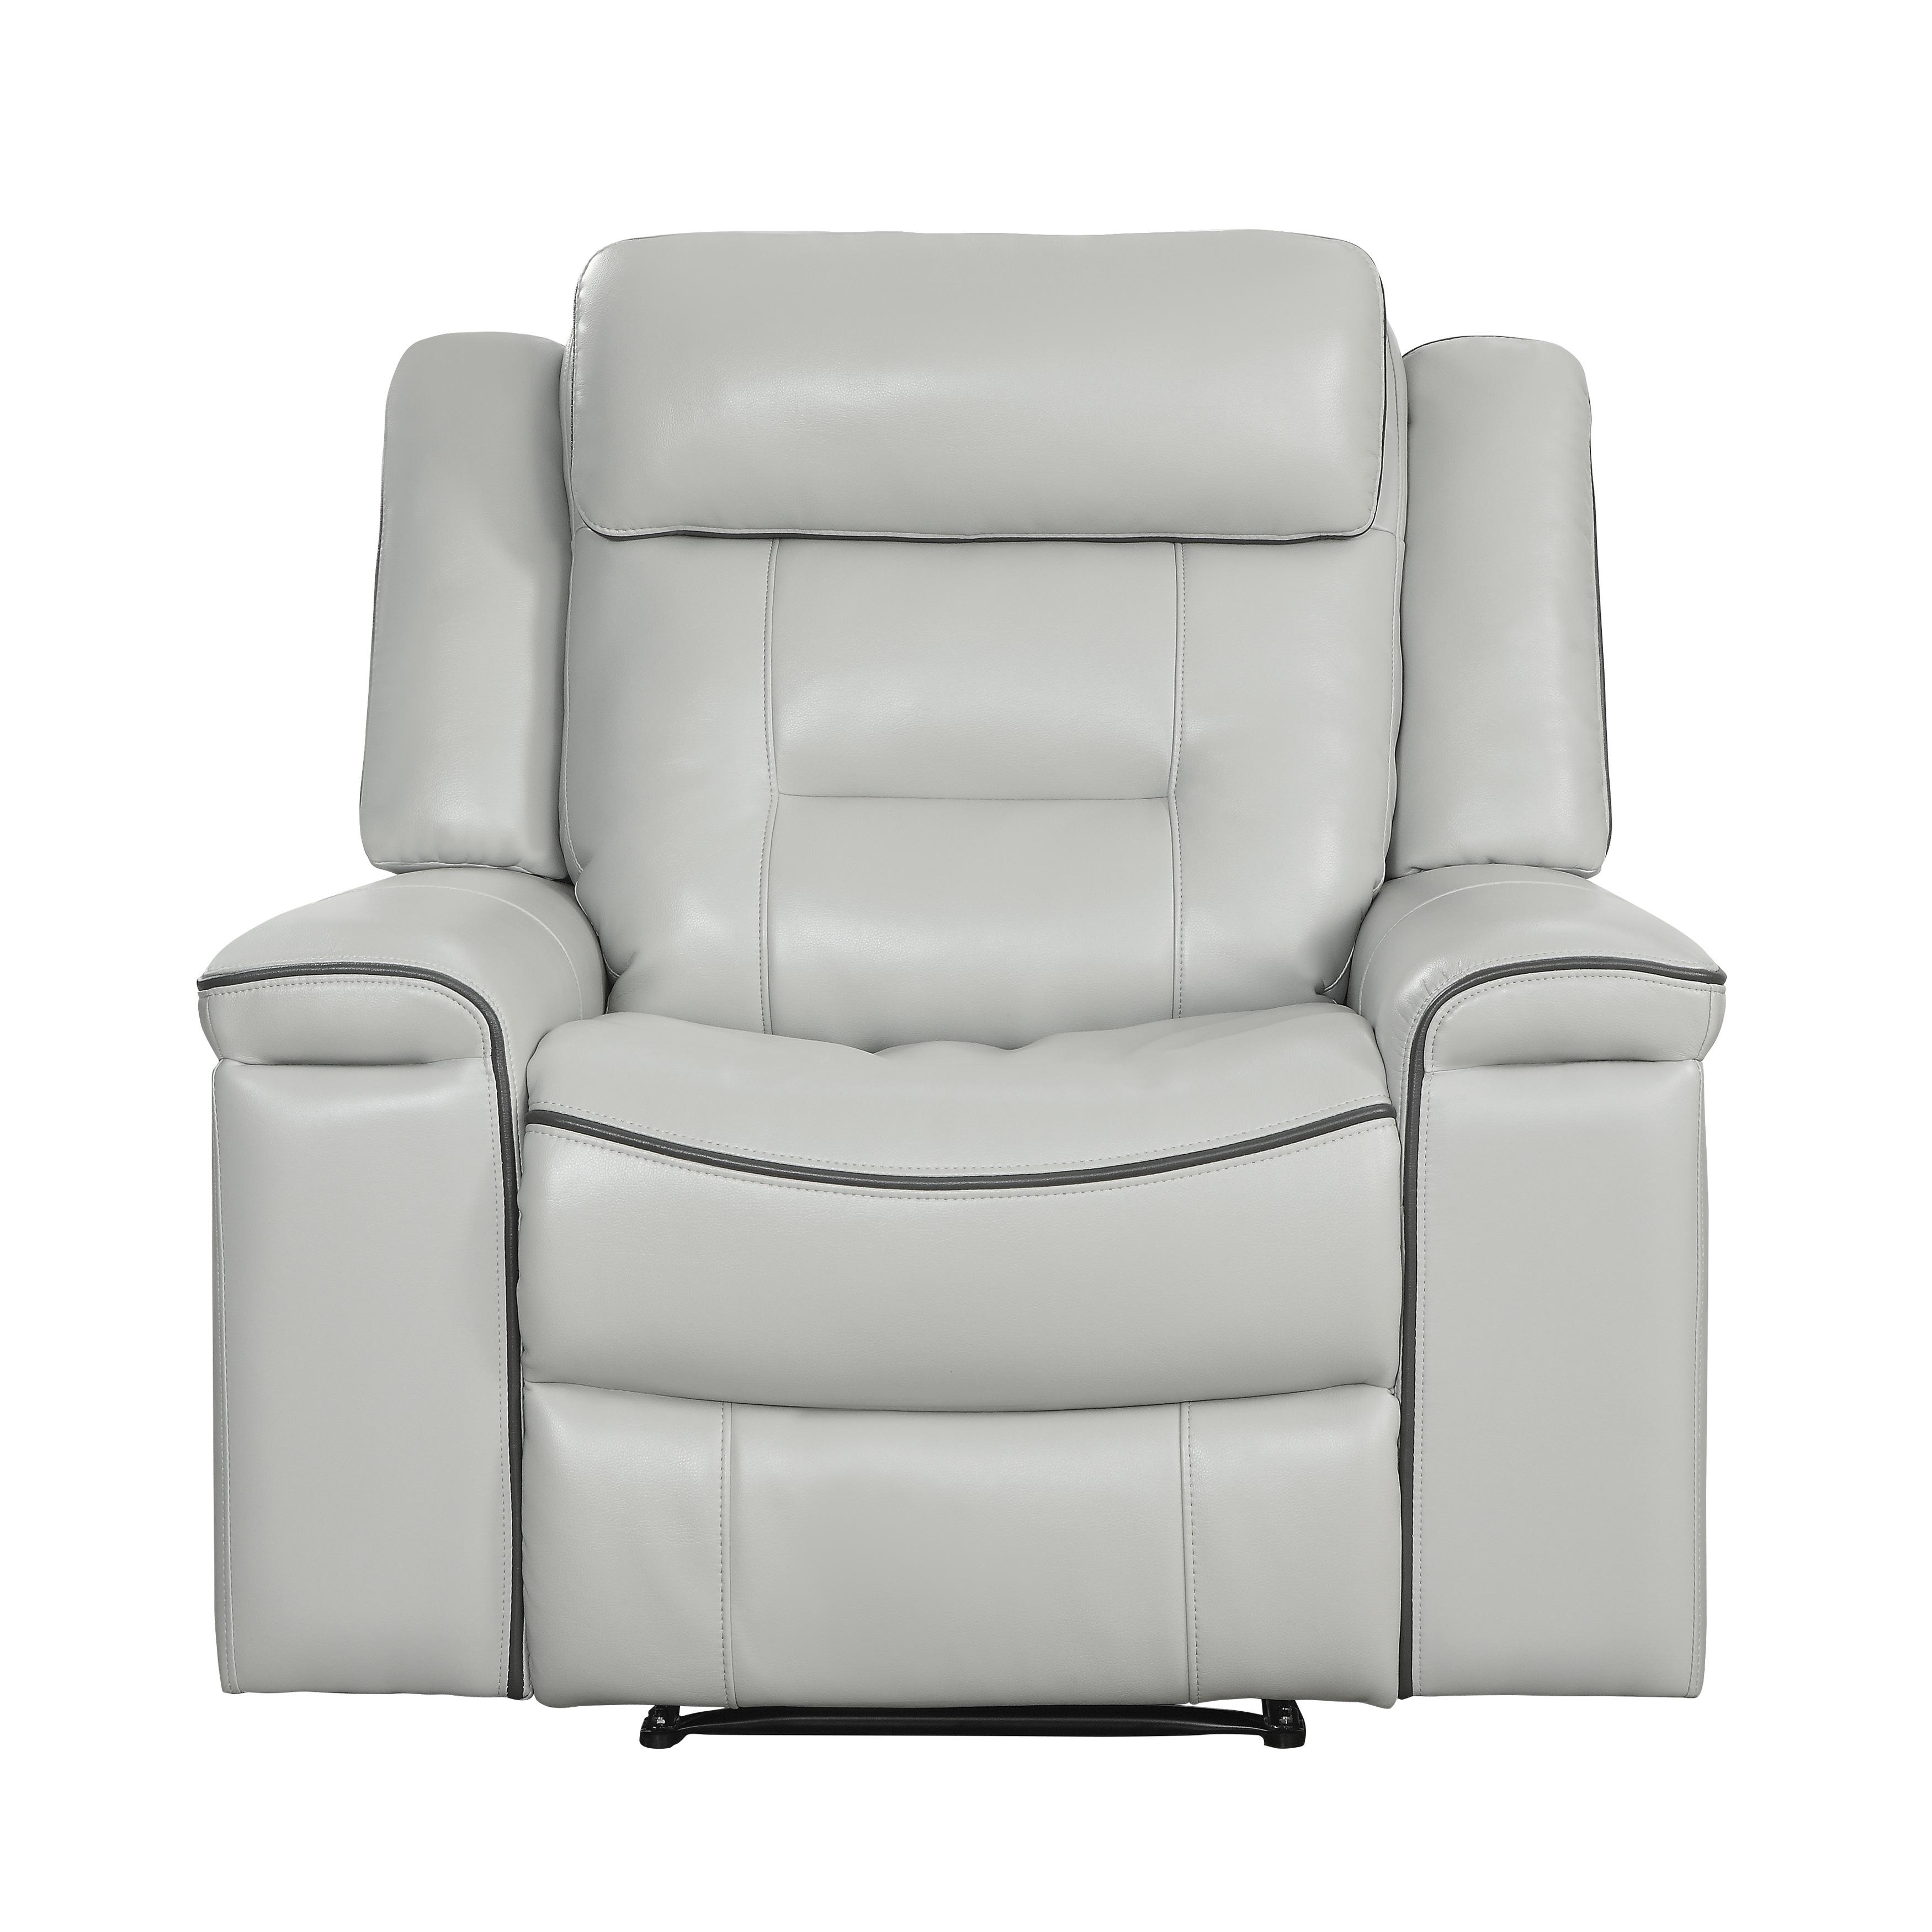 Contemporary Reclining Chair 9999GY-1 Darwan 9999GY-1 in Light Gray Faux Leather